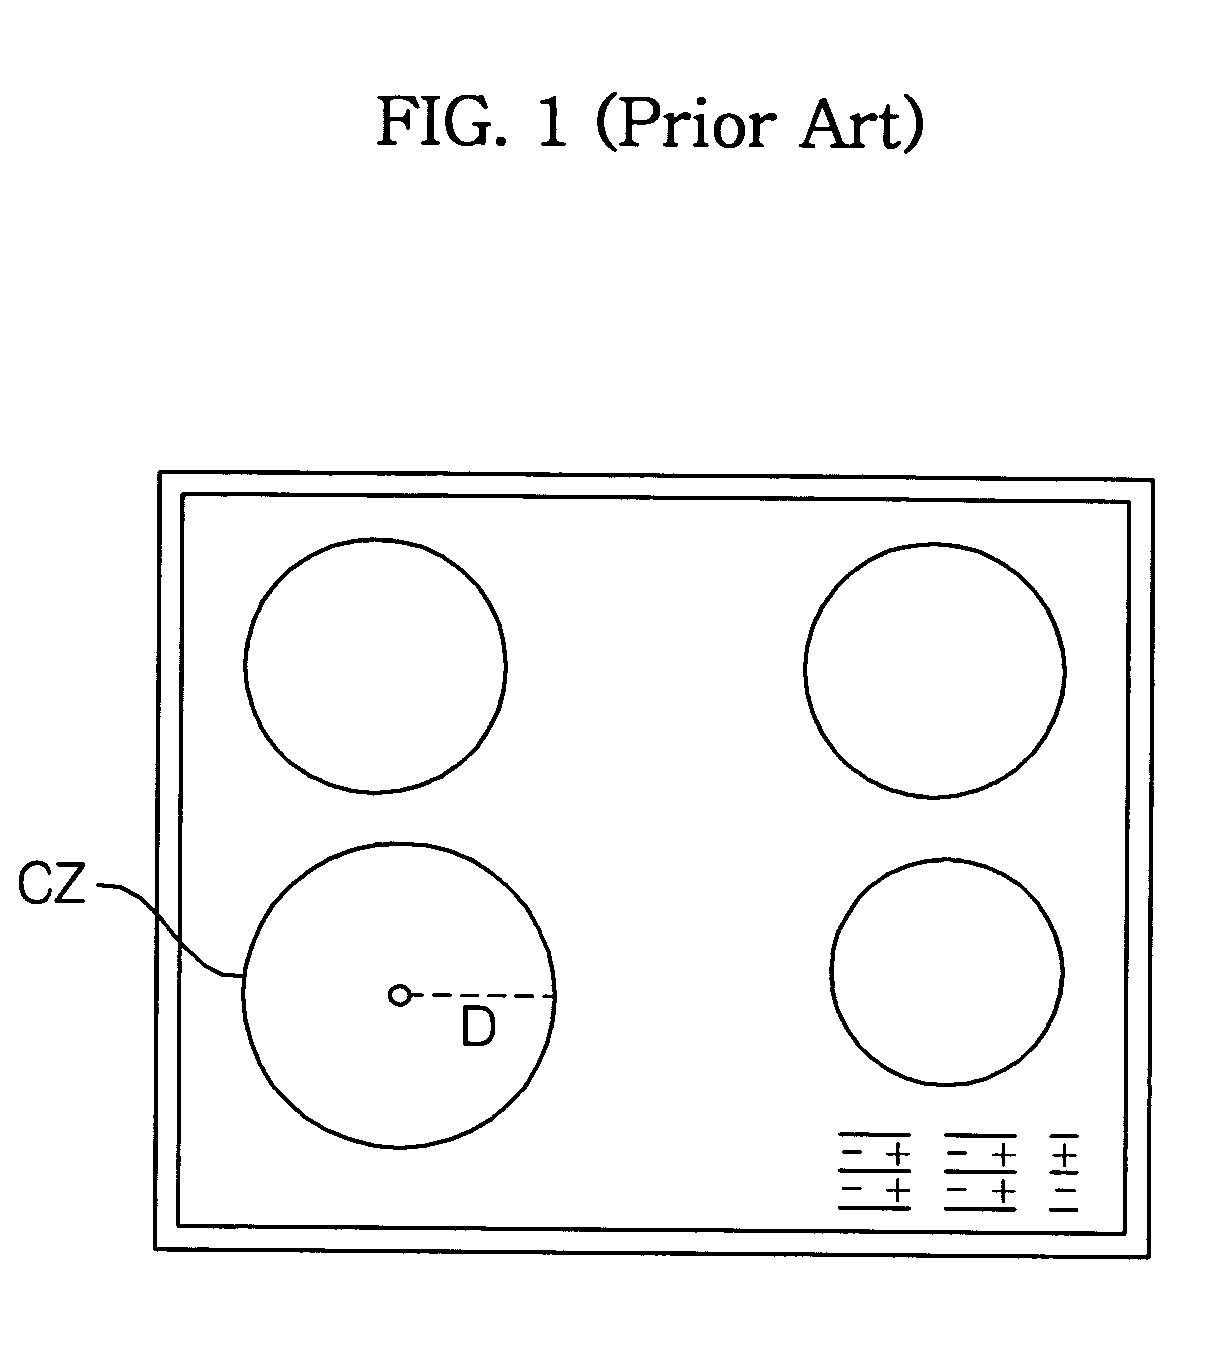 Induction heating cooking apparatus, operation of which is interrupted by container eccentricity